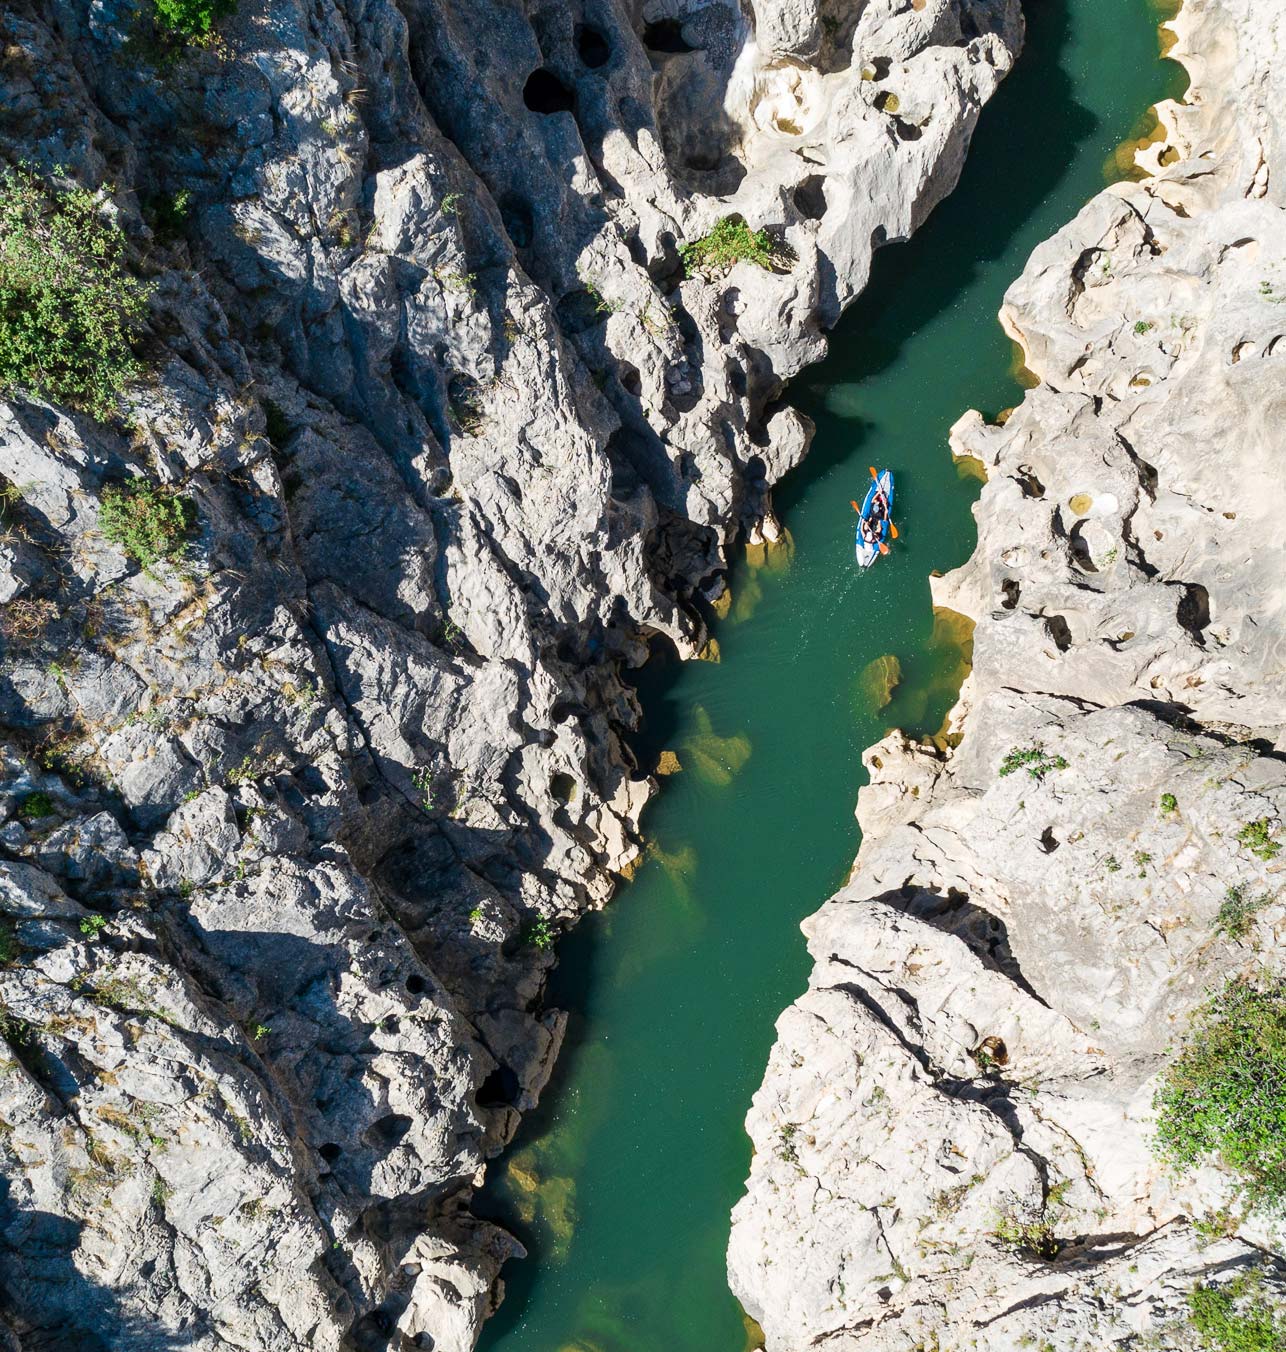 Kayaking in the Hérault gorges